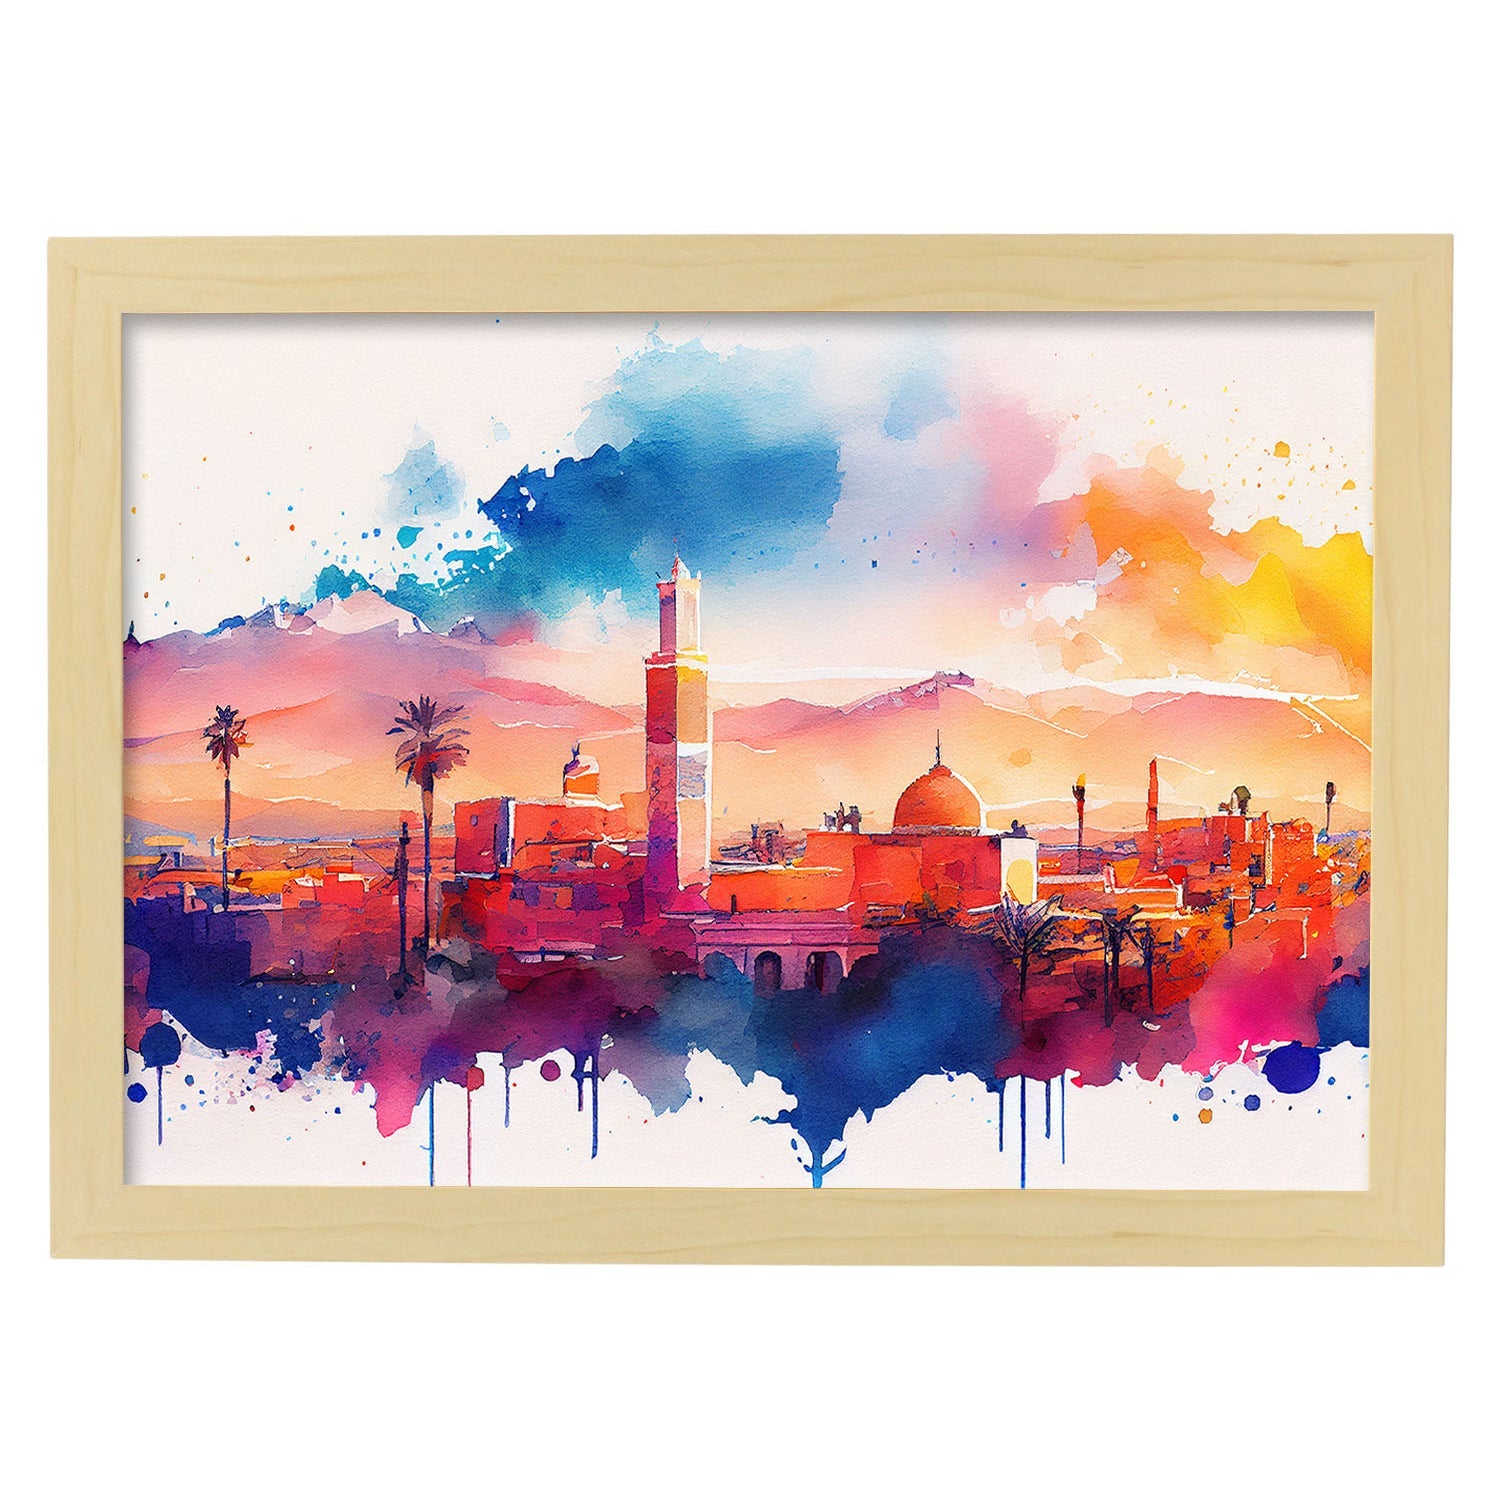 Nacnic watercolor of a skyline of the city of Marrakech. Aesthetic Wall Art Prints for Bedroom or Living Room Design.-Artwork-Nacnic-A4-Marco Madera Clara-Nacnic Estudio SL